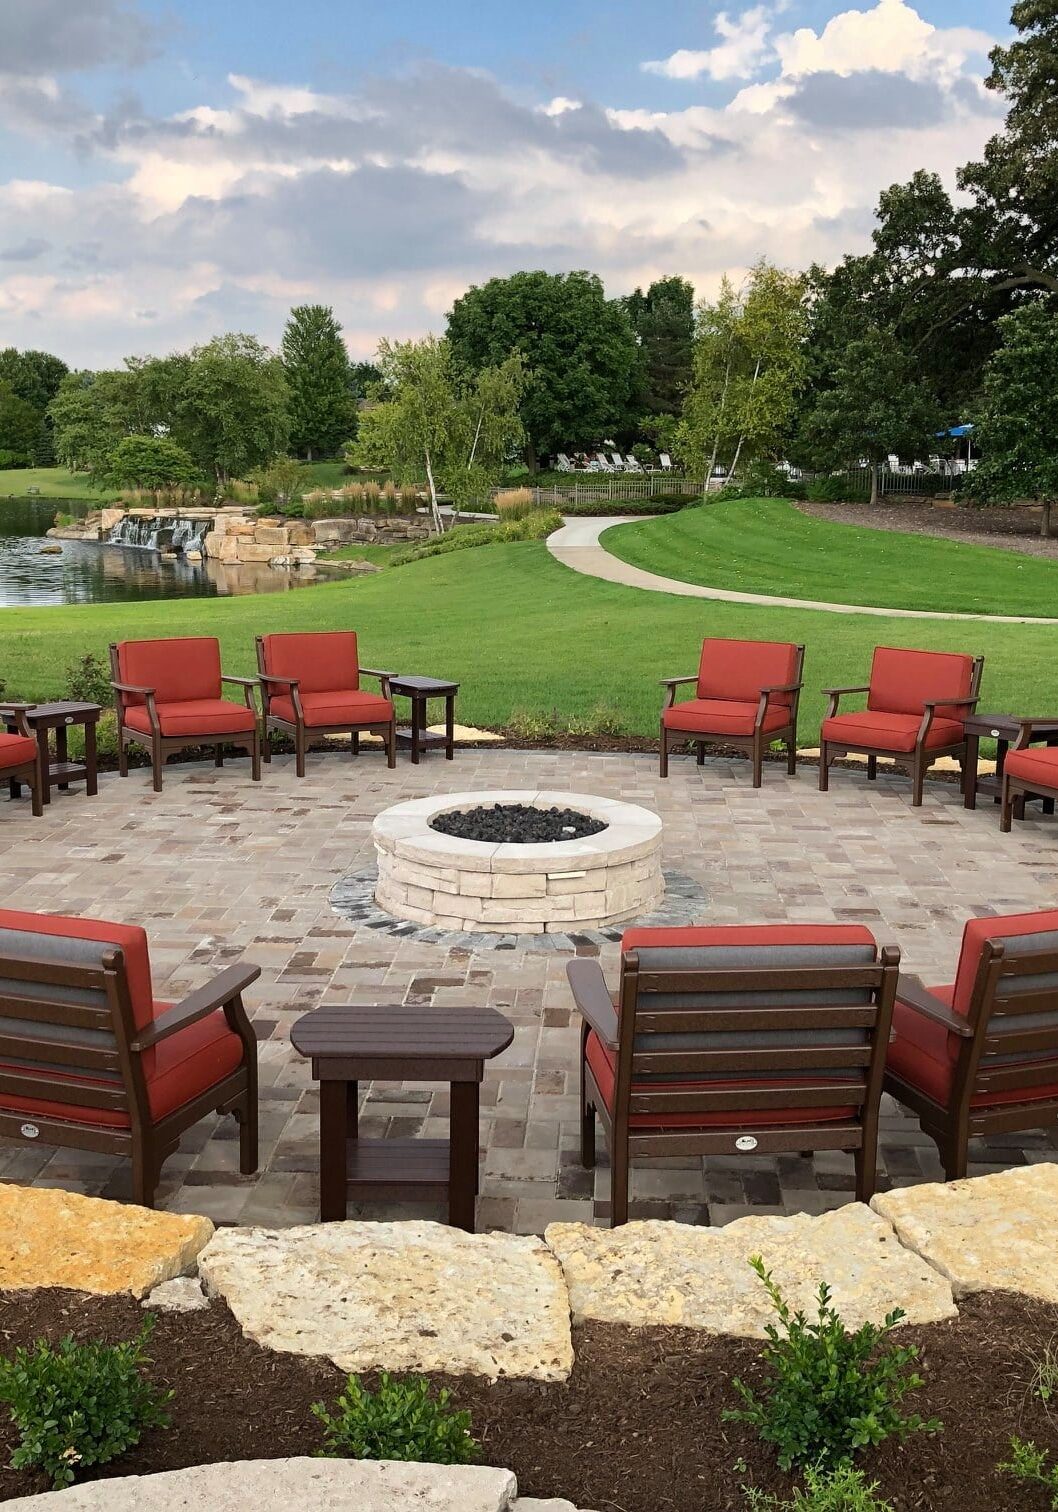 Commercial Outdoor Living Spaces Transforming St. Charles, IL